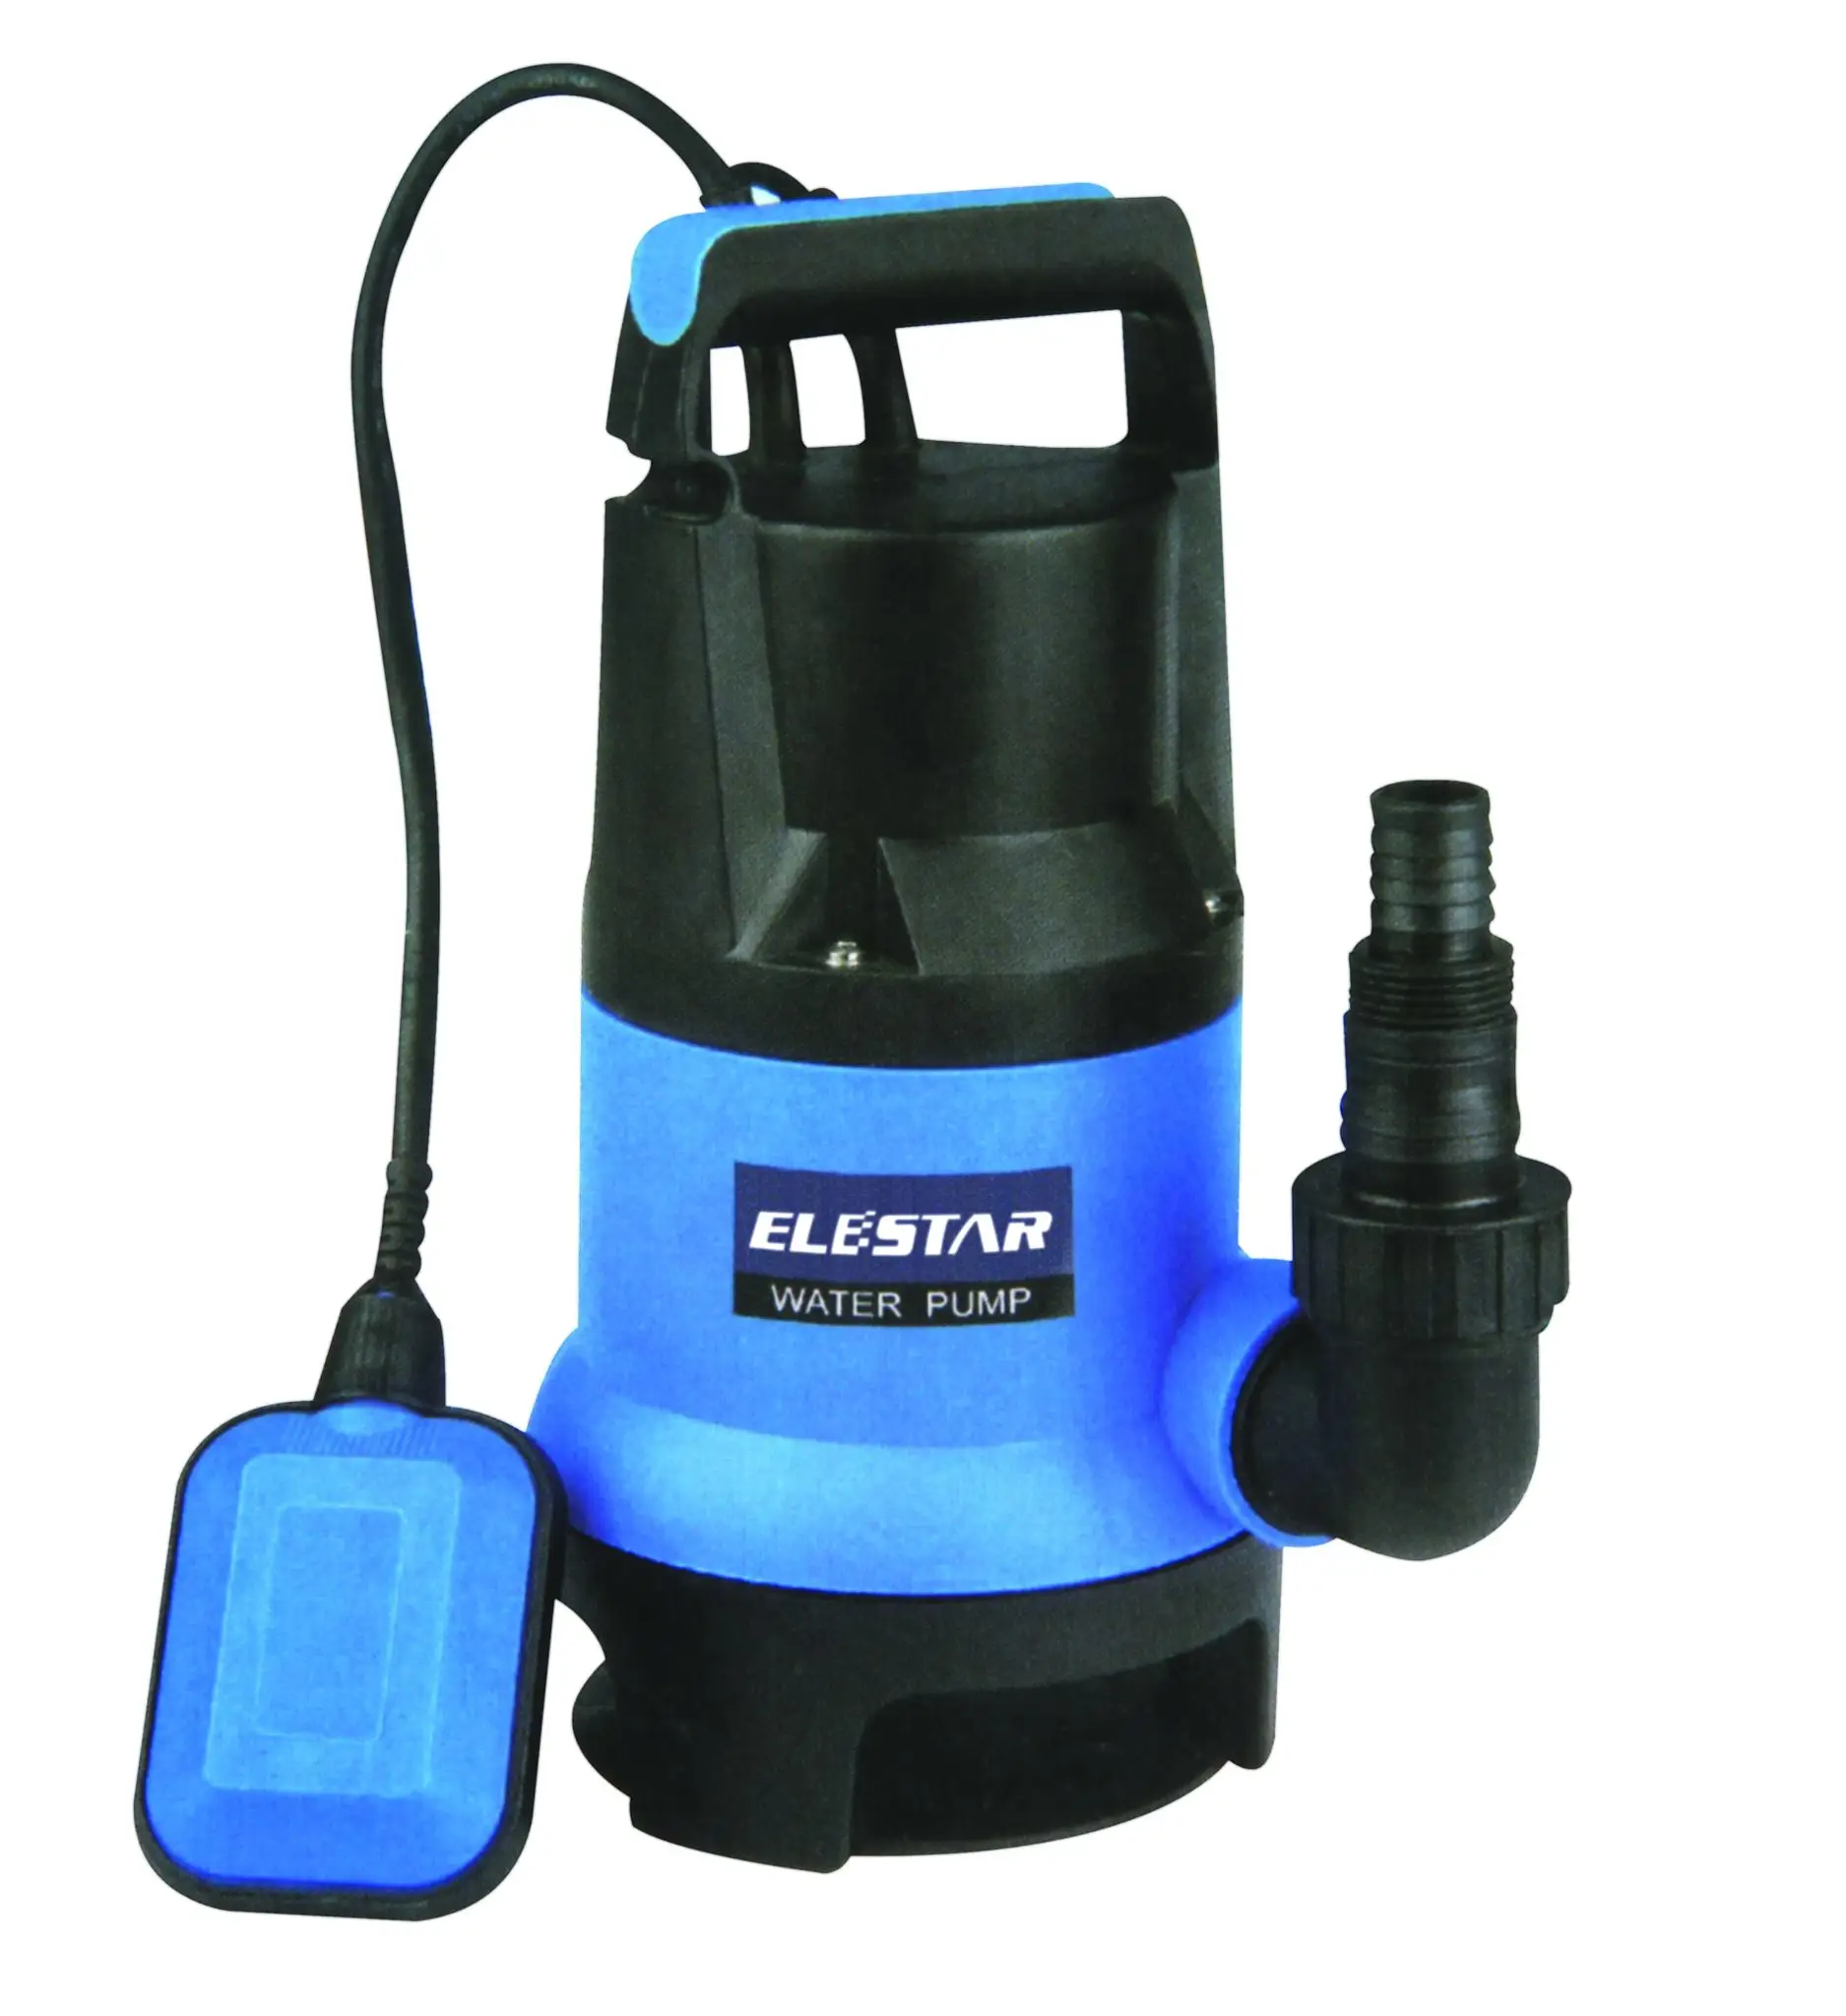 High Quality Plastic Clean Water Submersible Pump With Float Switch Sewage Water Pumps Swimming Pool Pump - Plastic Submersible Water Pumps,Sewage Water Pumps Clean Water,Swimming Pool Pump Product on Alibaba.com